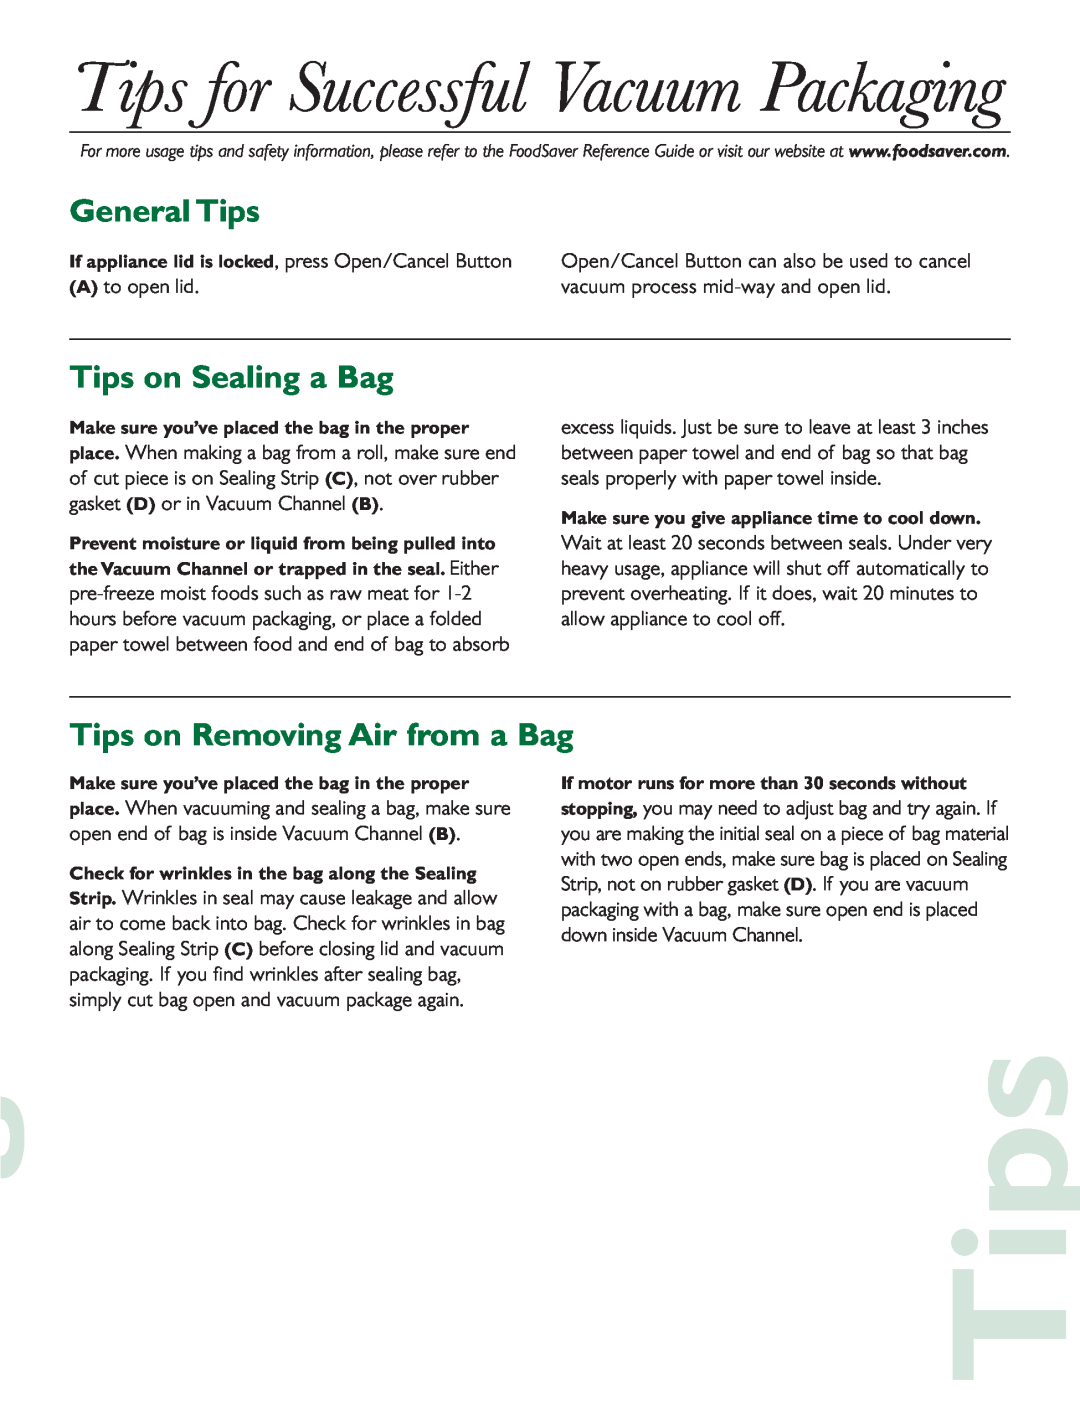 FoodSaver V300 quick start Tips for Successful Vacuum Packaging, General Tips, Tips on Sealing a Bag, A to open lid 